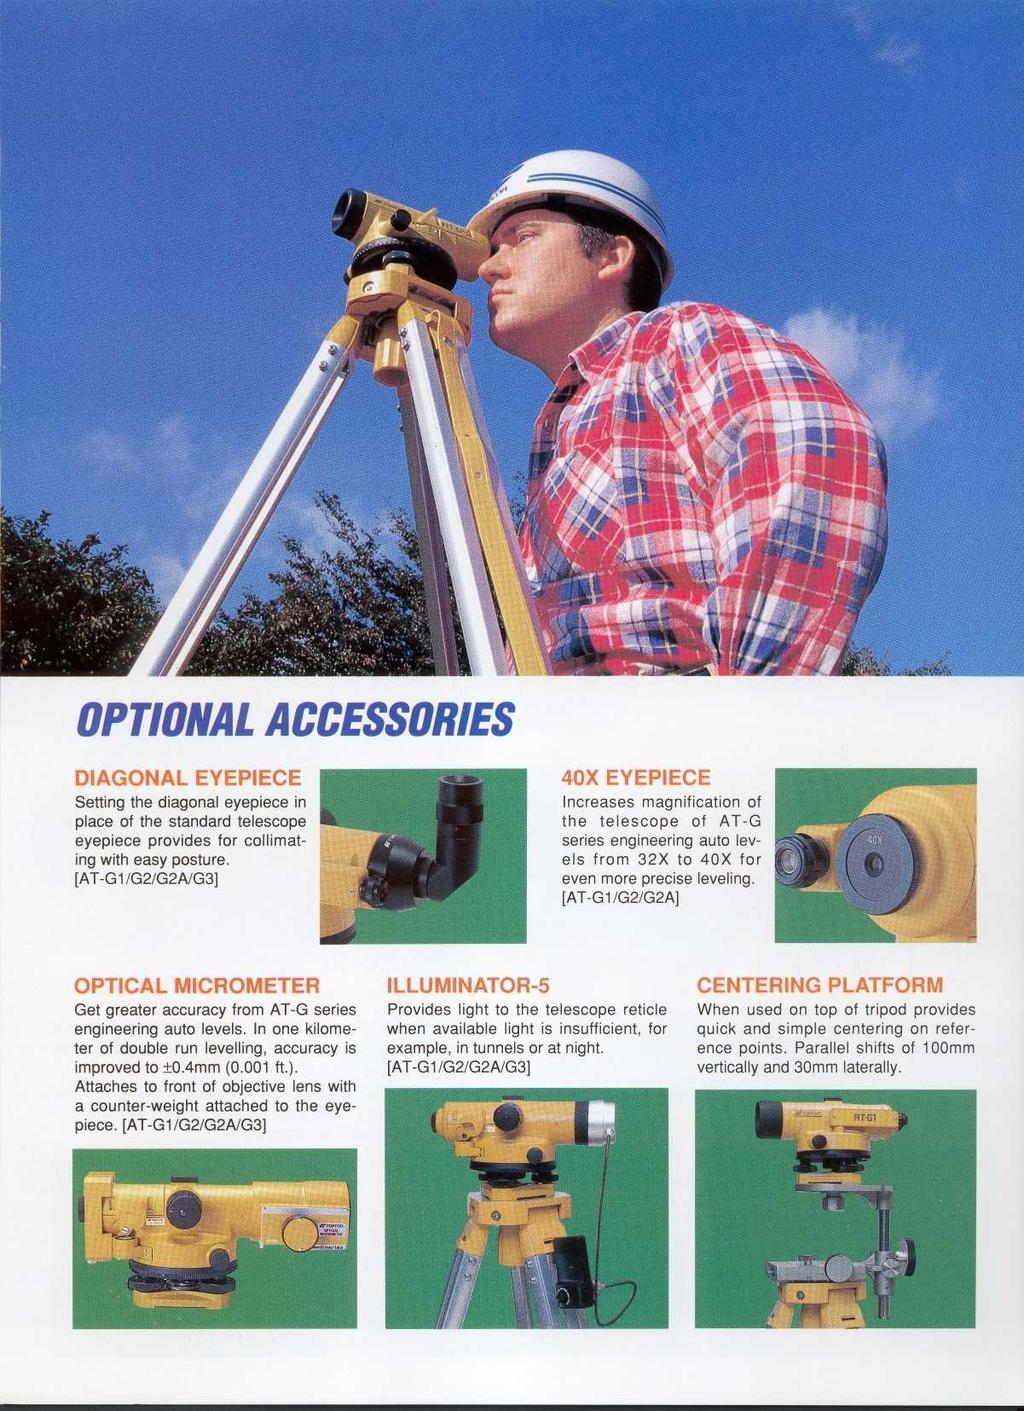 OPTIONAL ACCESSORIES Setting the diagonal eyepiece it place of the standard telescope eyepiece provides for collimating with easy posture.